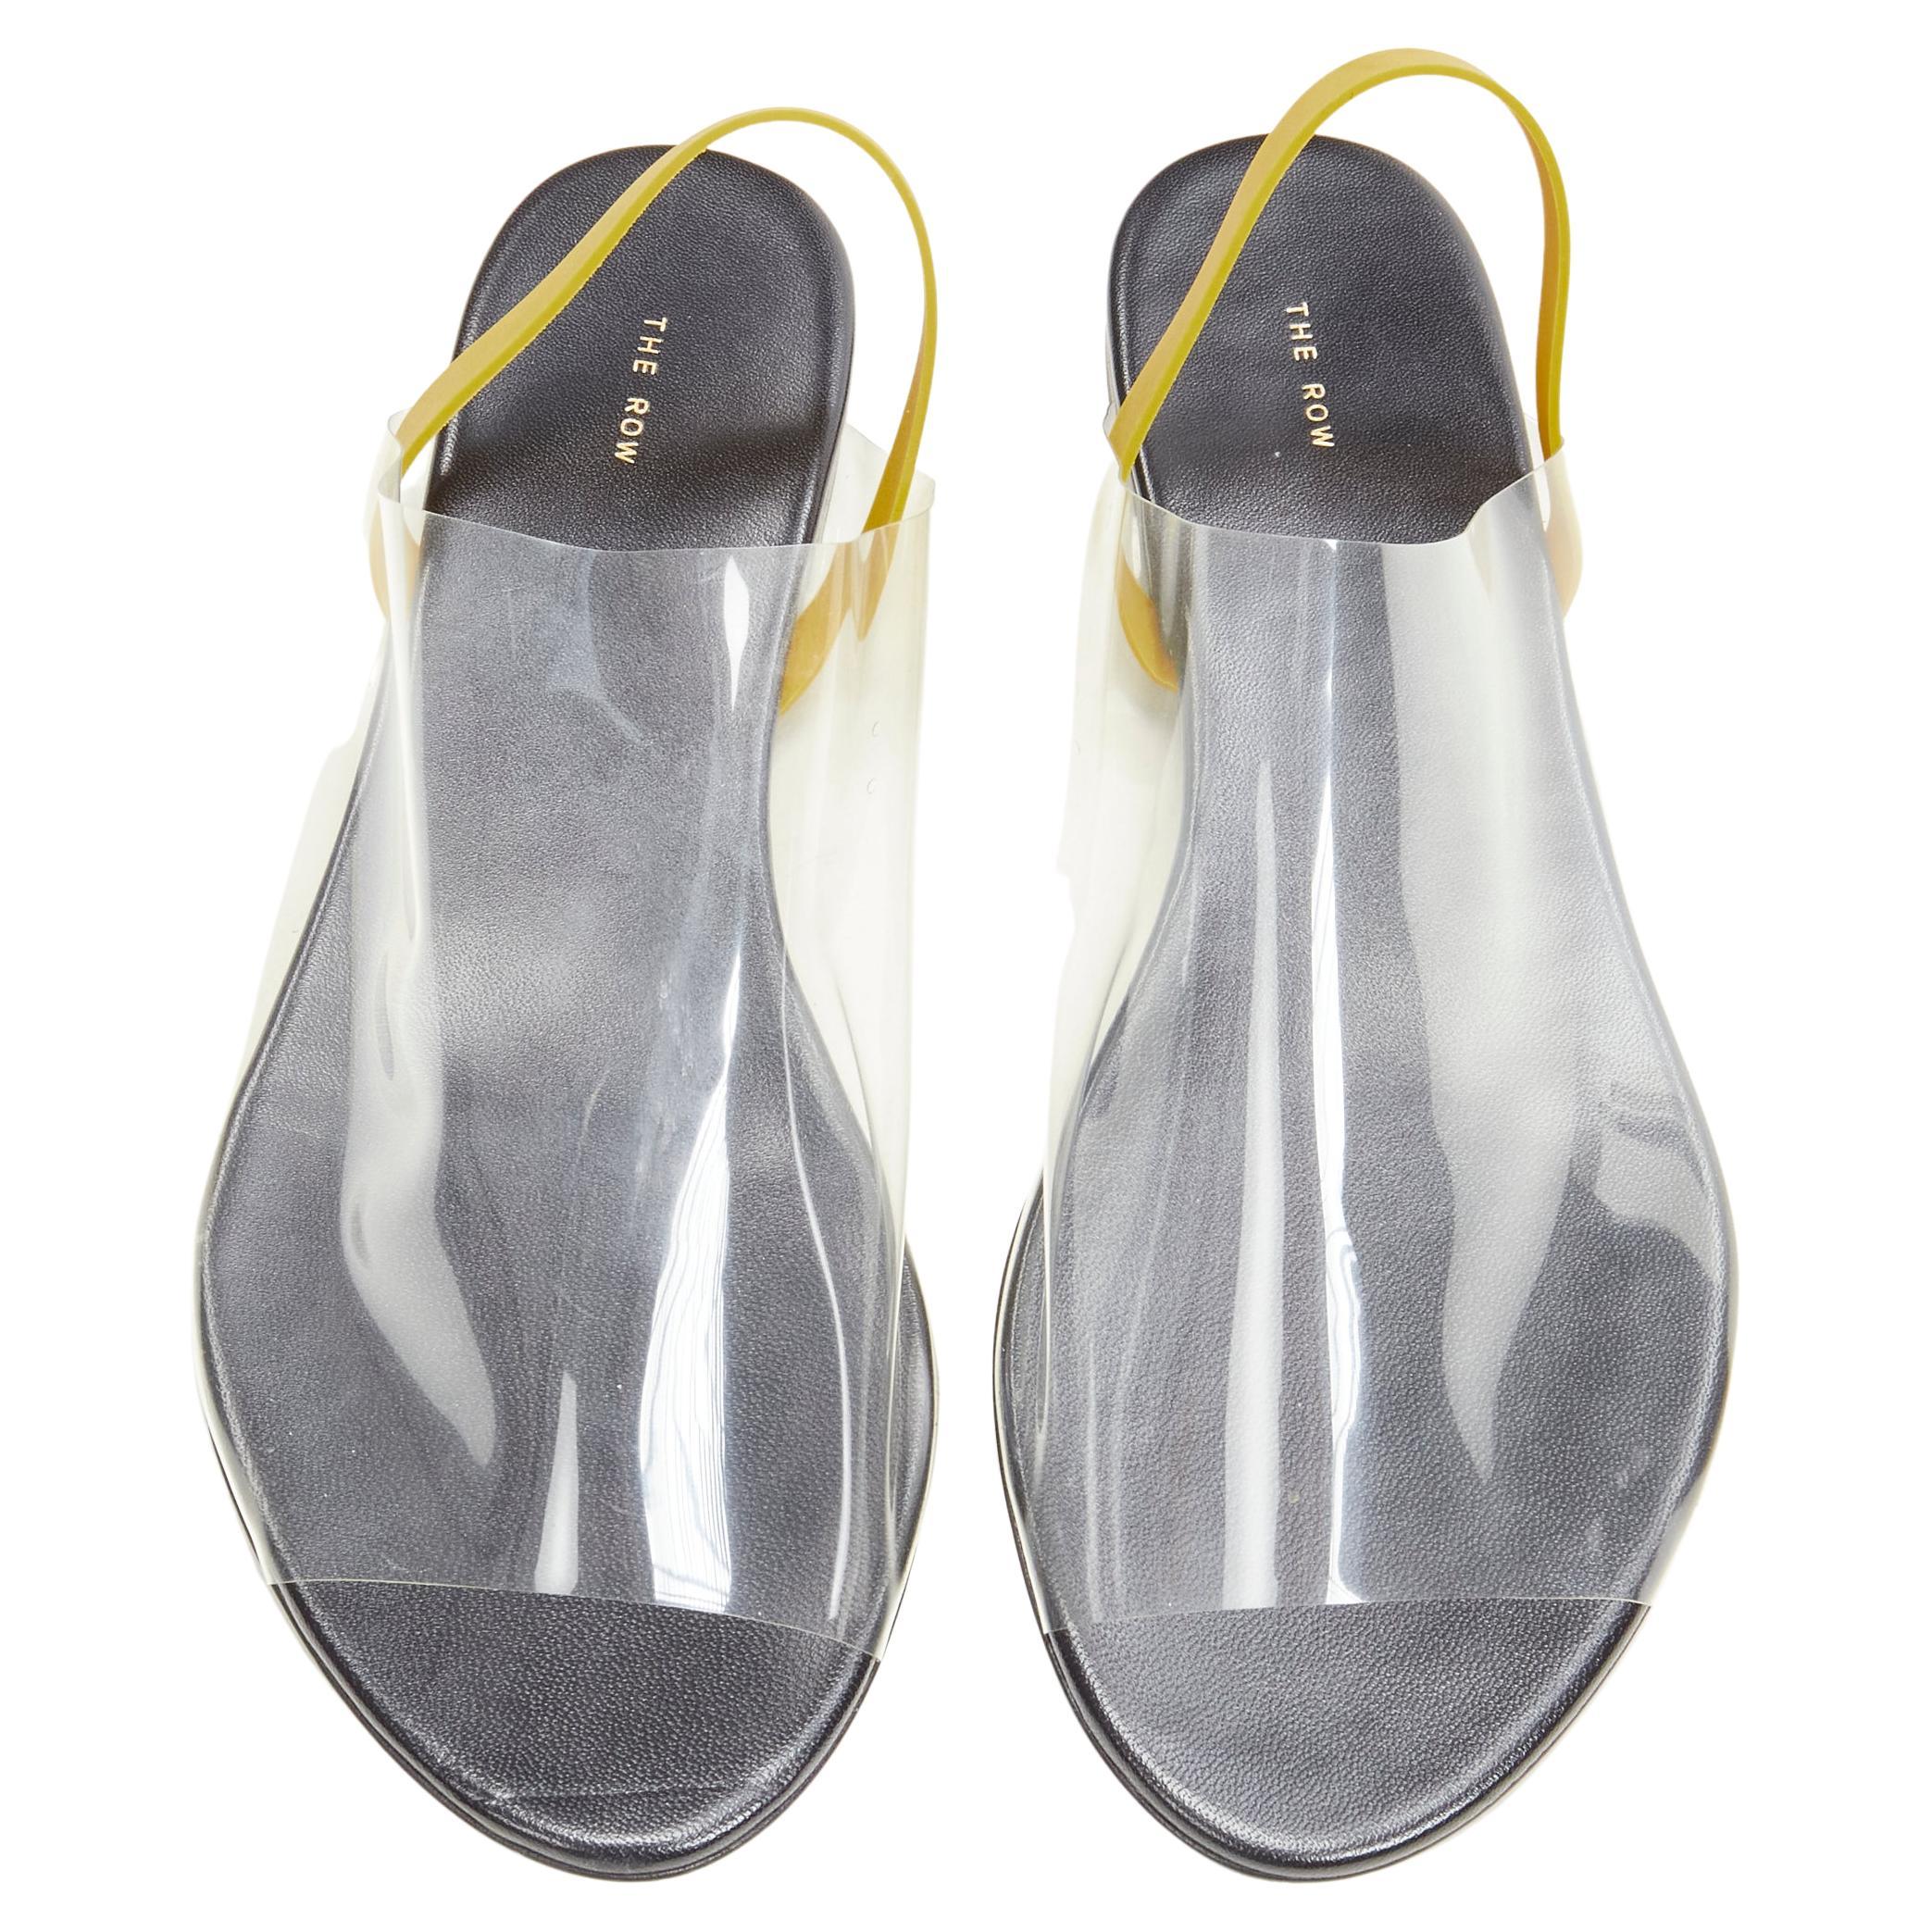 new THE ROW Clear PVC open toe yellow rubber slingback flat sandal EU36.5
Brand: The Row
Designer: Mary Kate and Ashley Olsen
Model: Clear Sandal
Material: PVC
Color: Clear
Pattern: Solid
Closure: Slingback
Extra Detail: Soft clear PVC wide. Open